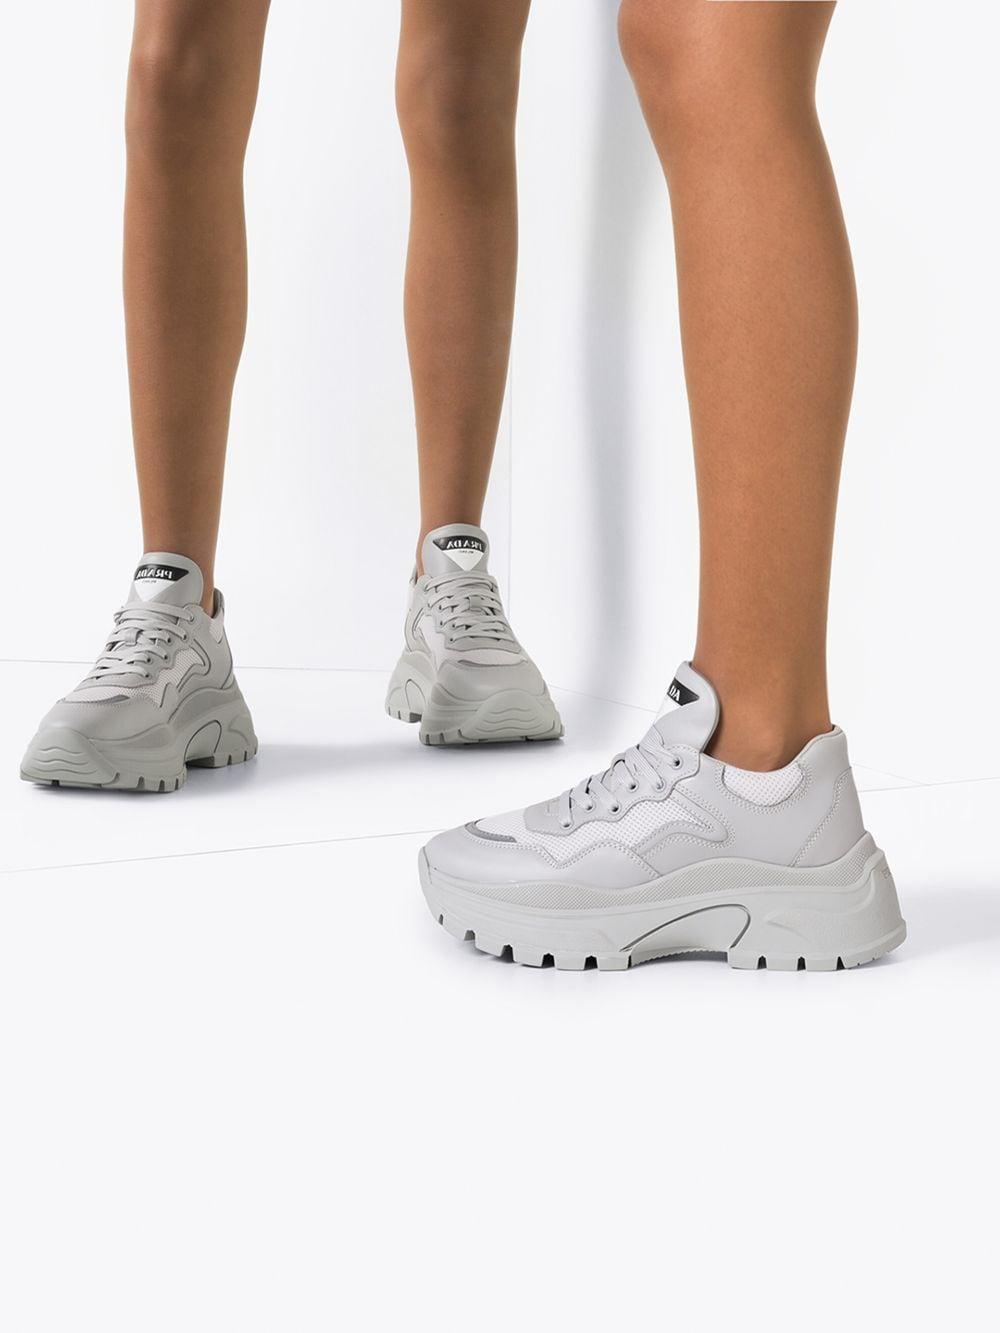 Prada Leather Chunky Panelled Sneakers in Grey (Gray) - Lyst